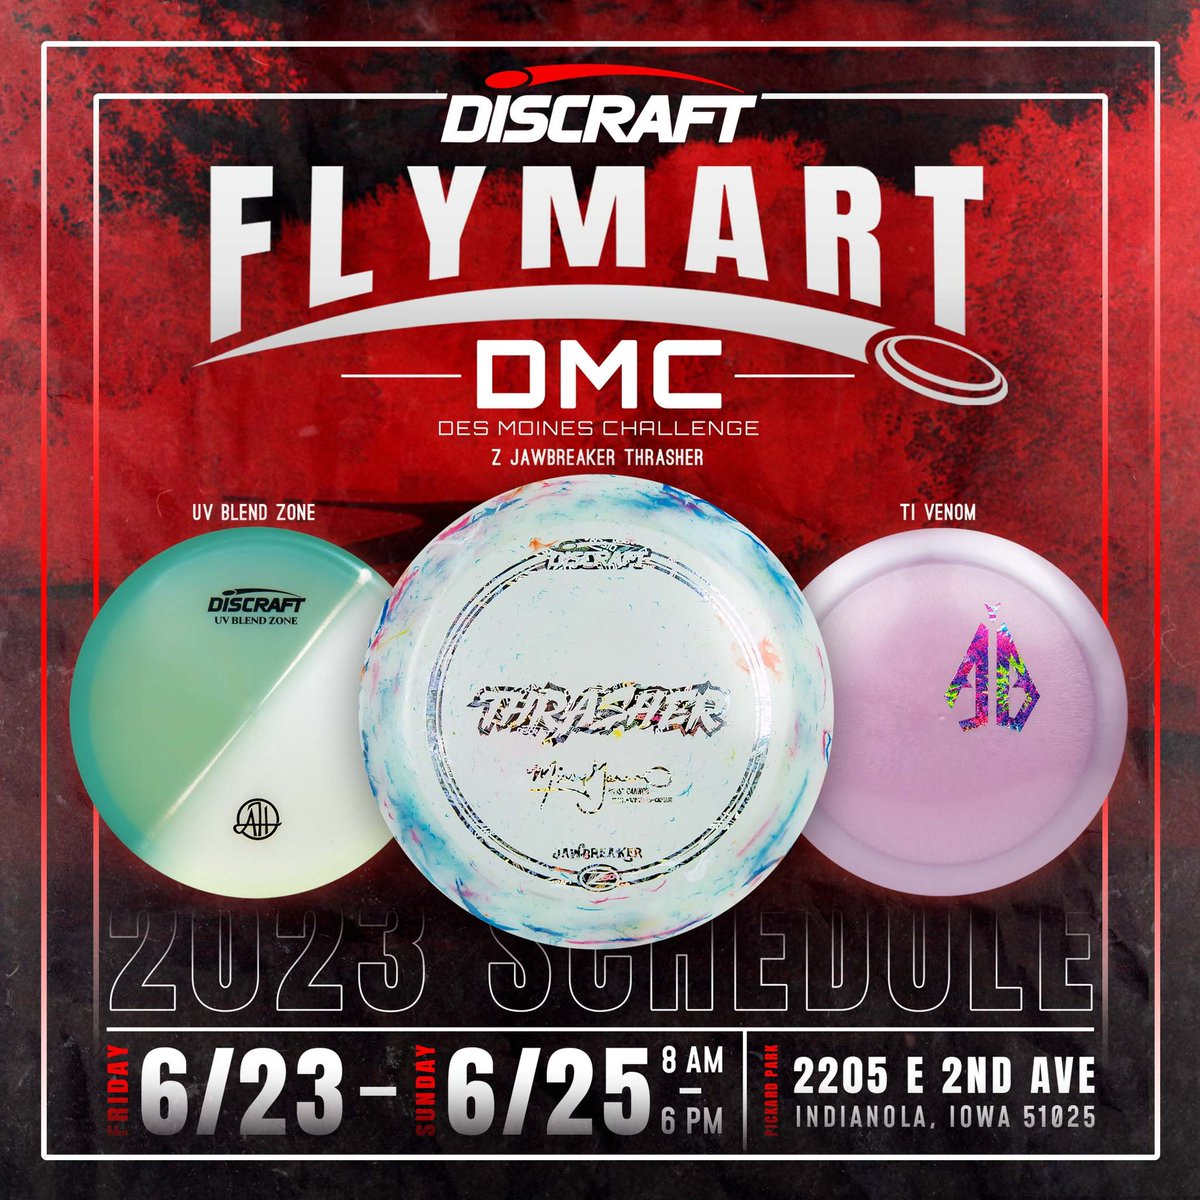 If your in town for the @desmoineschallenge make sure swing by the Discraft flymart and scope out some of the heaters we will be dropping! 

#Discgolf #Discraft #TeamDiscraft